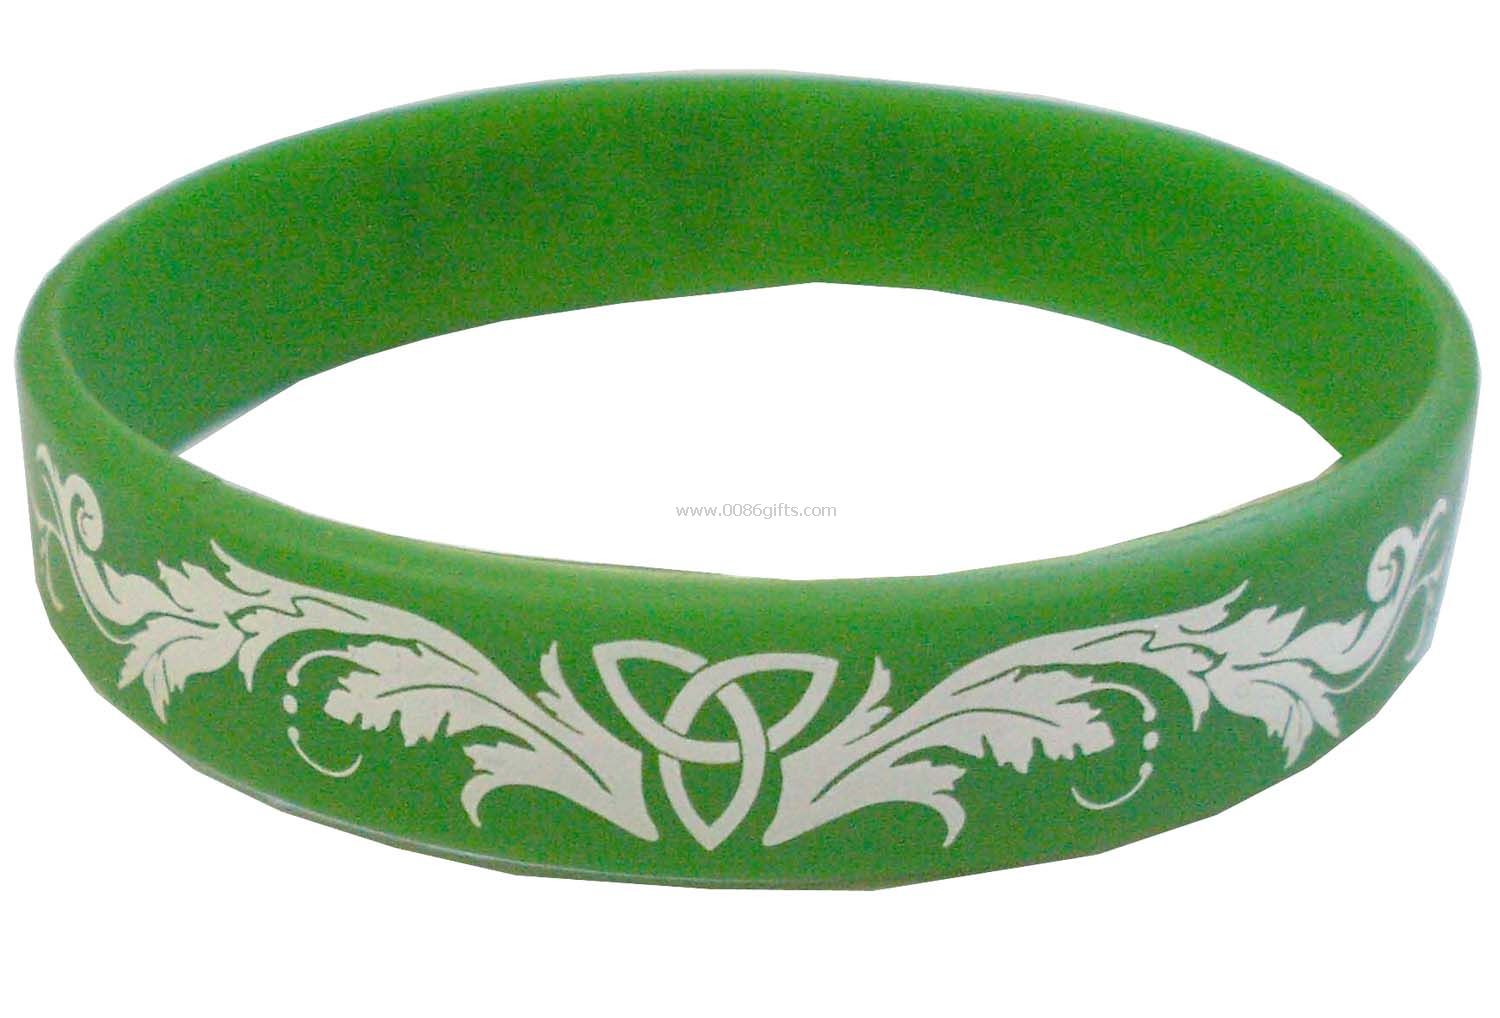 Personalized Silicone wristbands